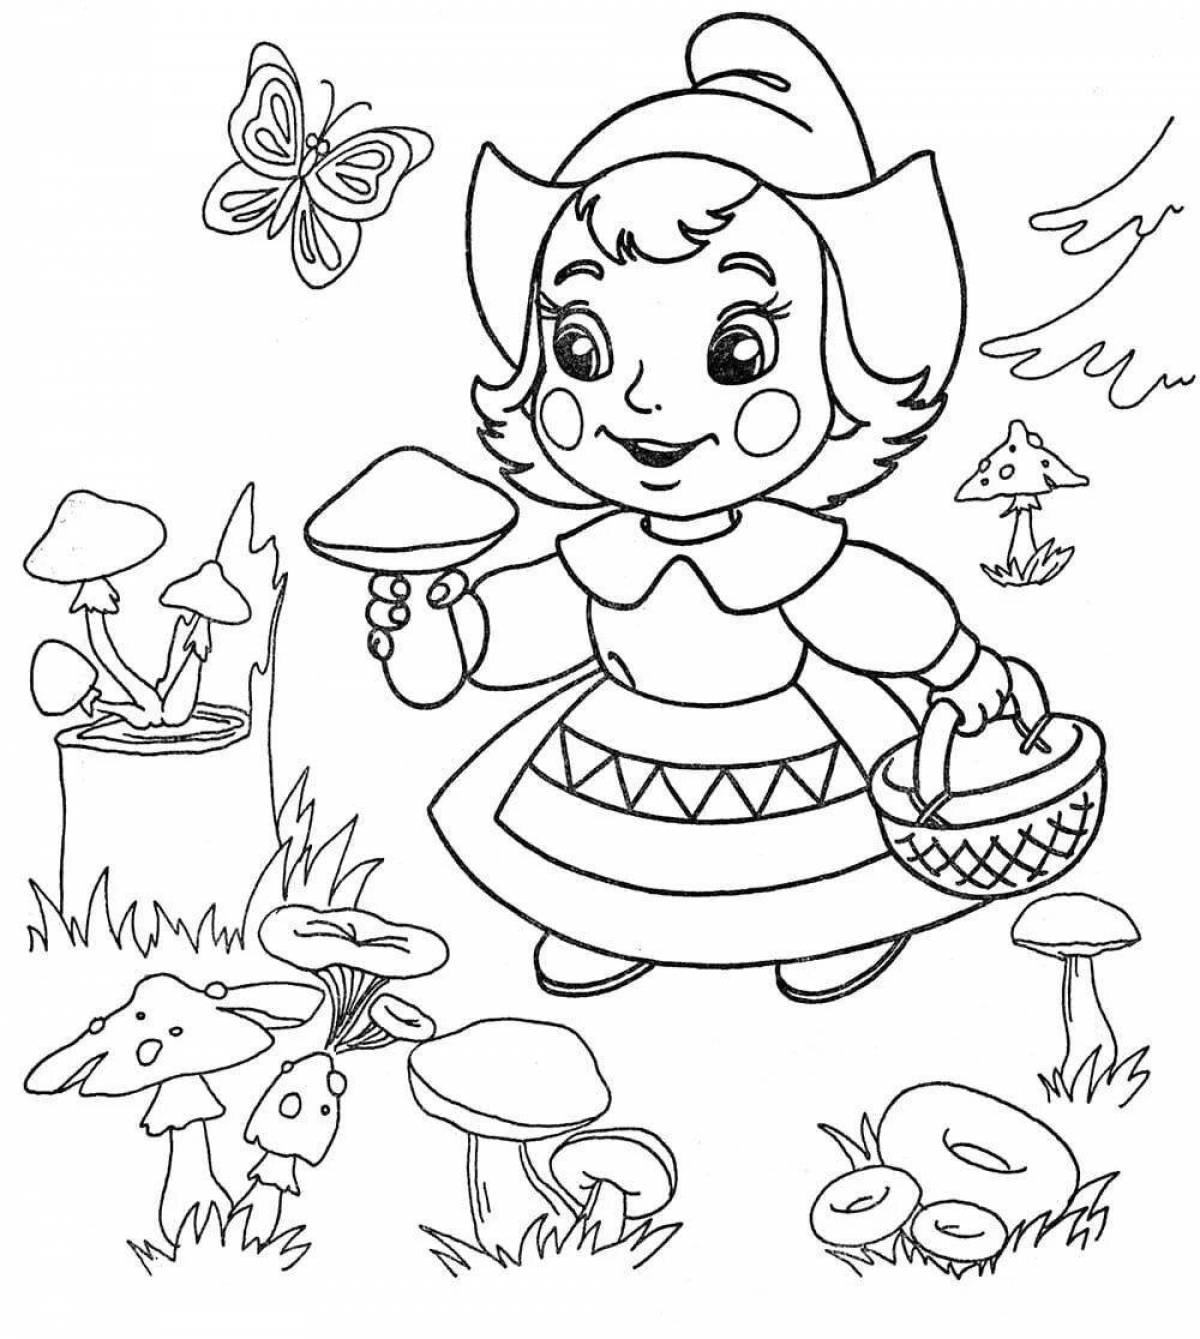 Charming little red riding hood coloring book